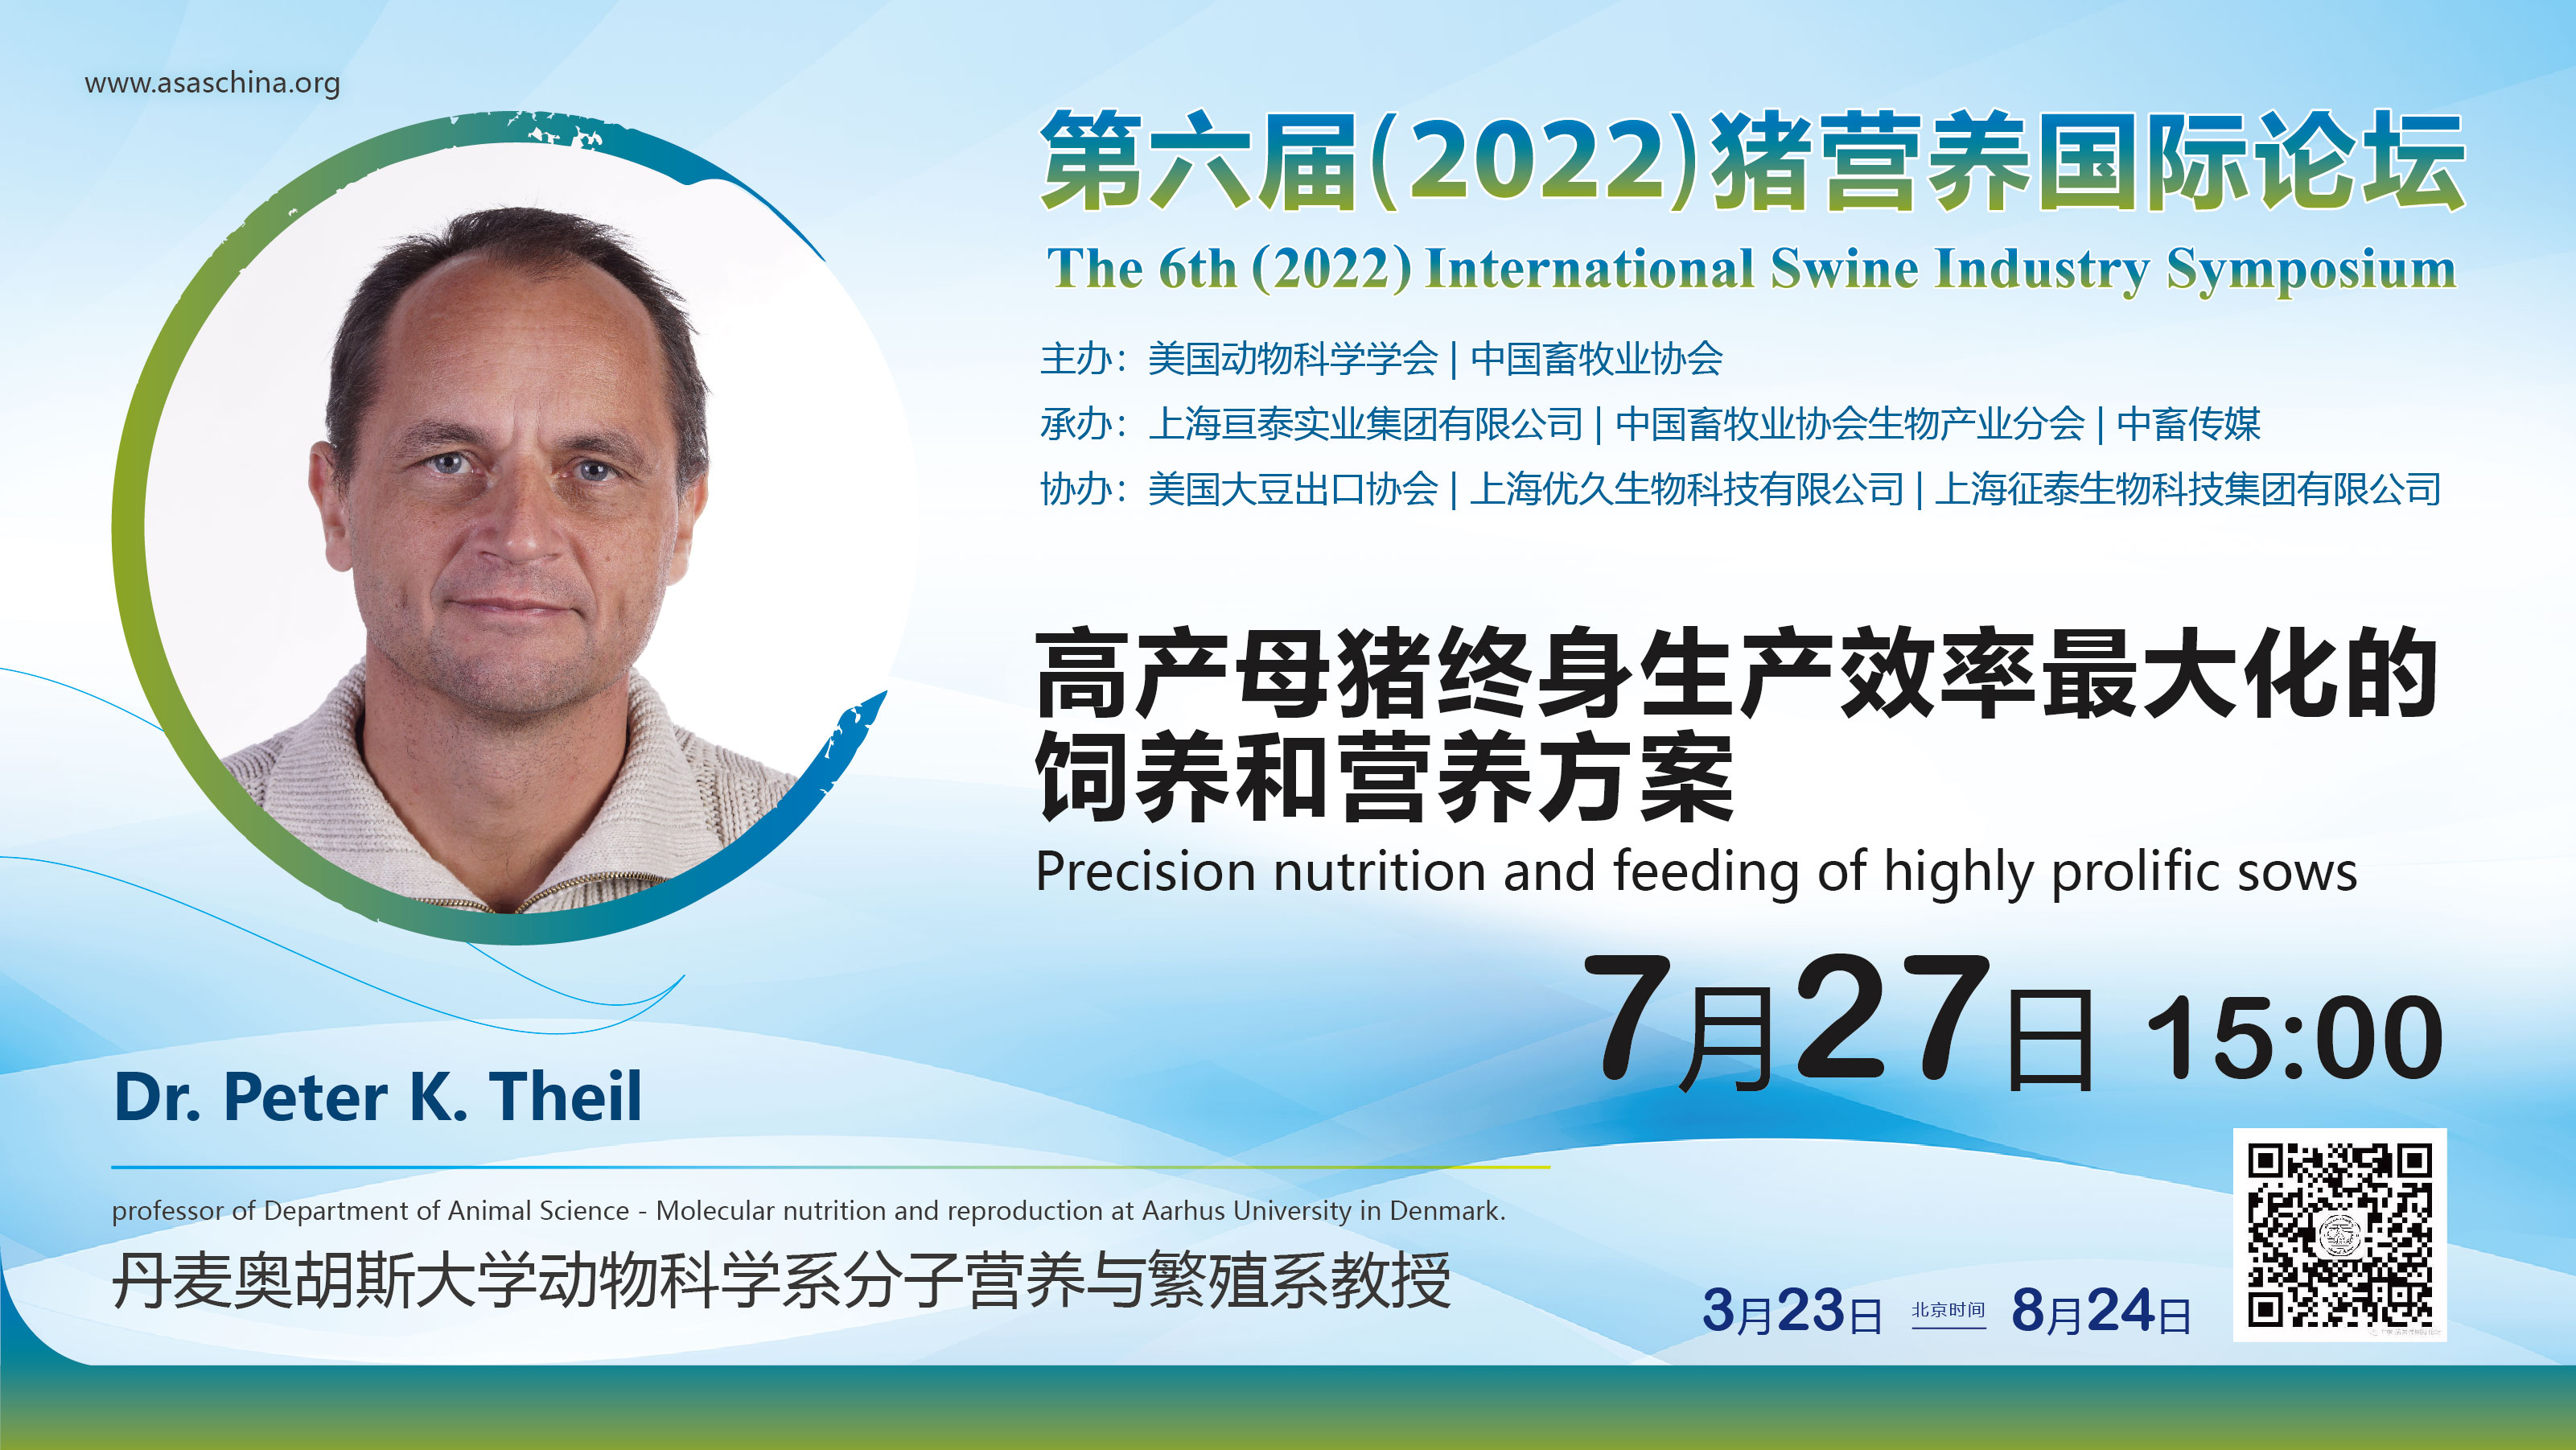 Precision nutrition and feeding of highly prolific sows Peter Kappel Theil https://wx.vzan.com/live/page/8725DB6B880FD53542187A2459A6DB4C?topicid=1476570896&v=1658819092000&jumpitd=1